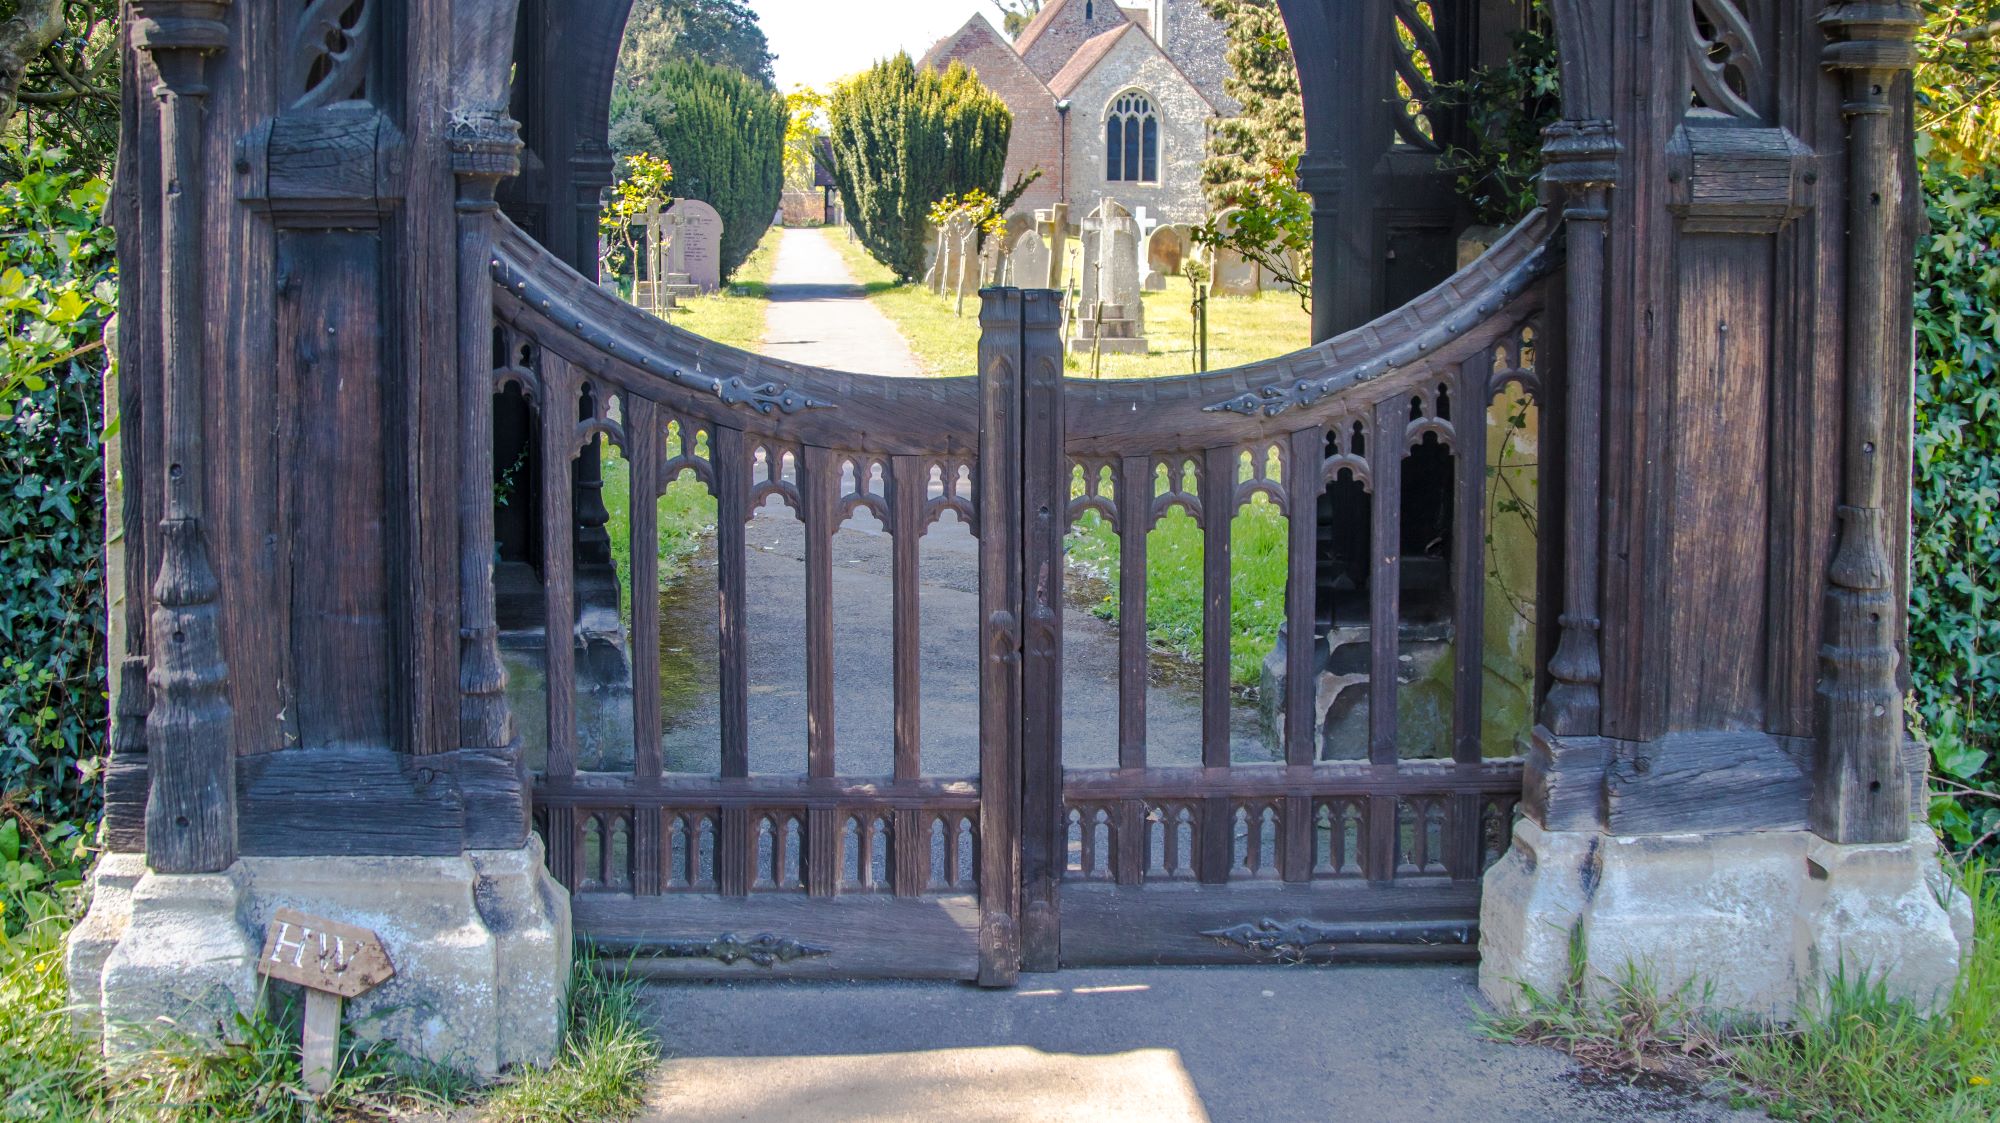 Decorative carved wooden gateway leading towards a church.